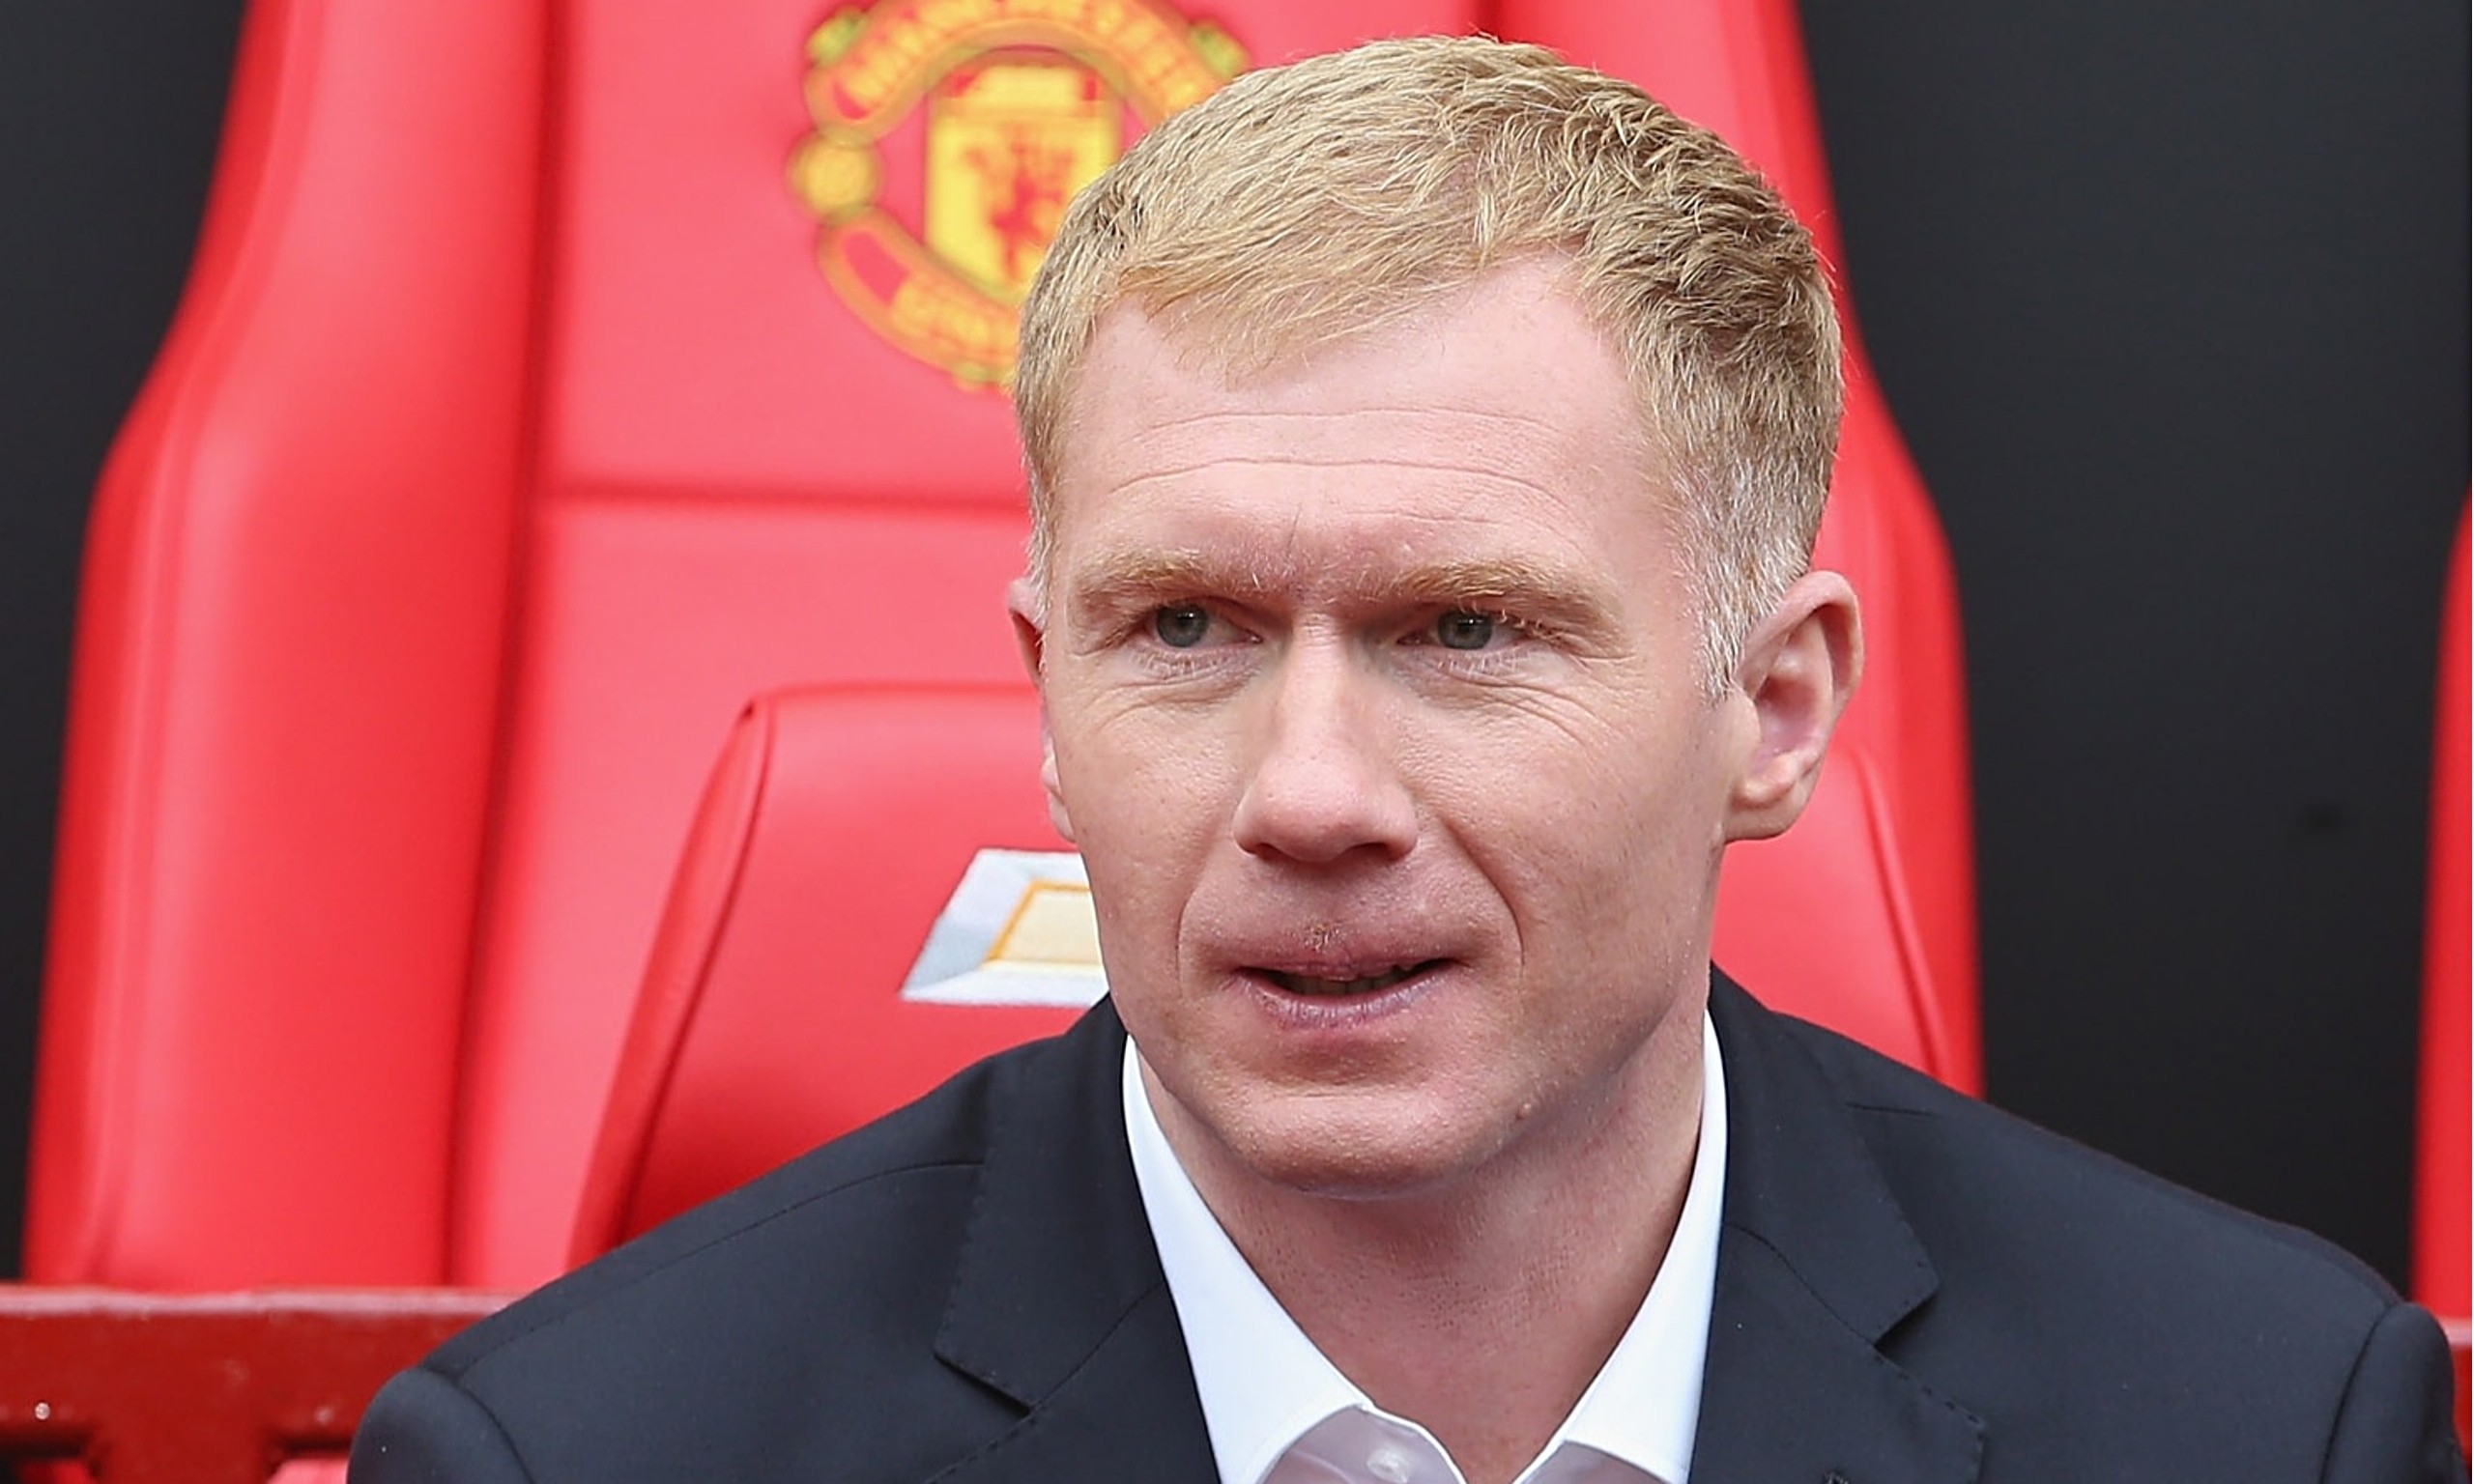 Champions League: Scholes reveals 3 Man United players behind 1-0 loss to Juventus